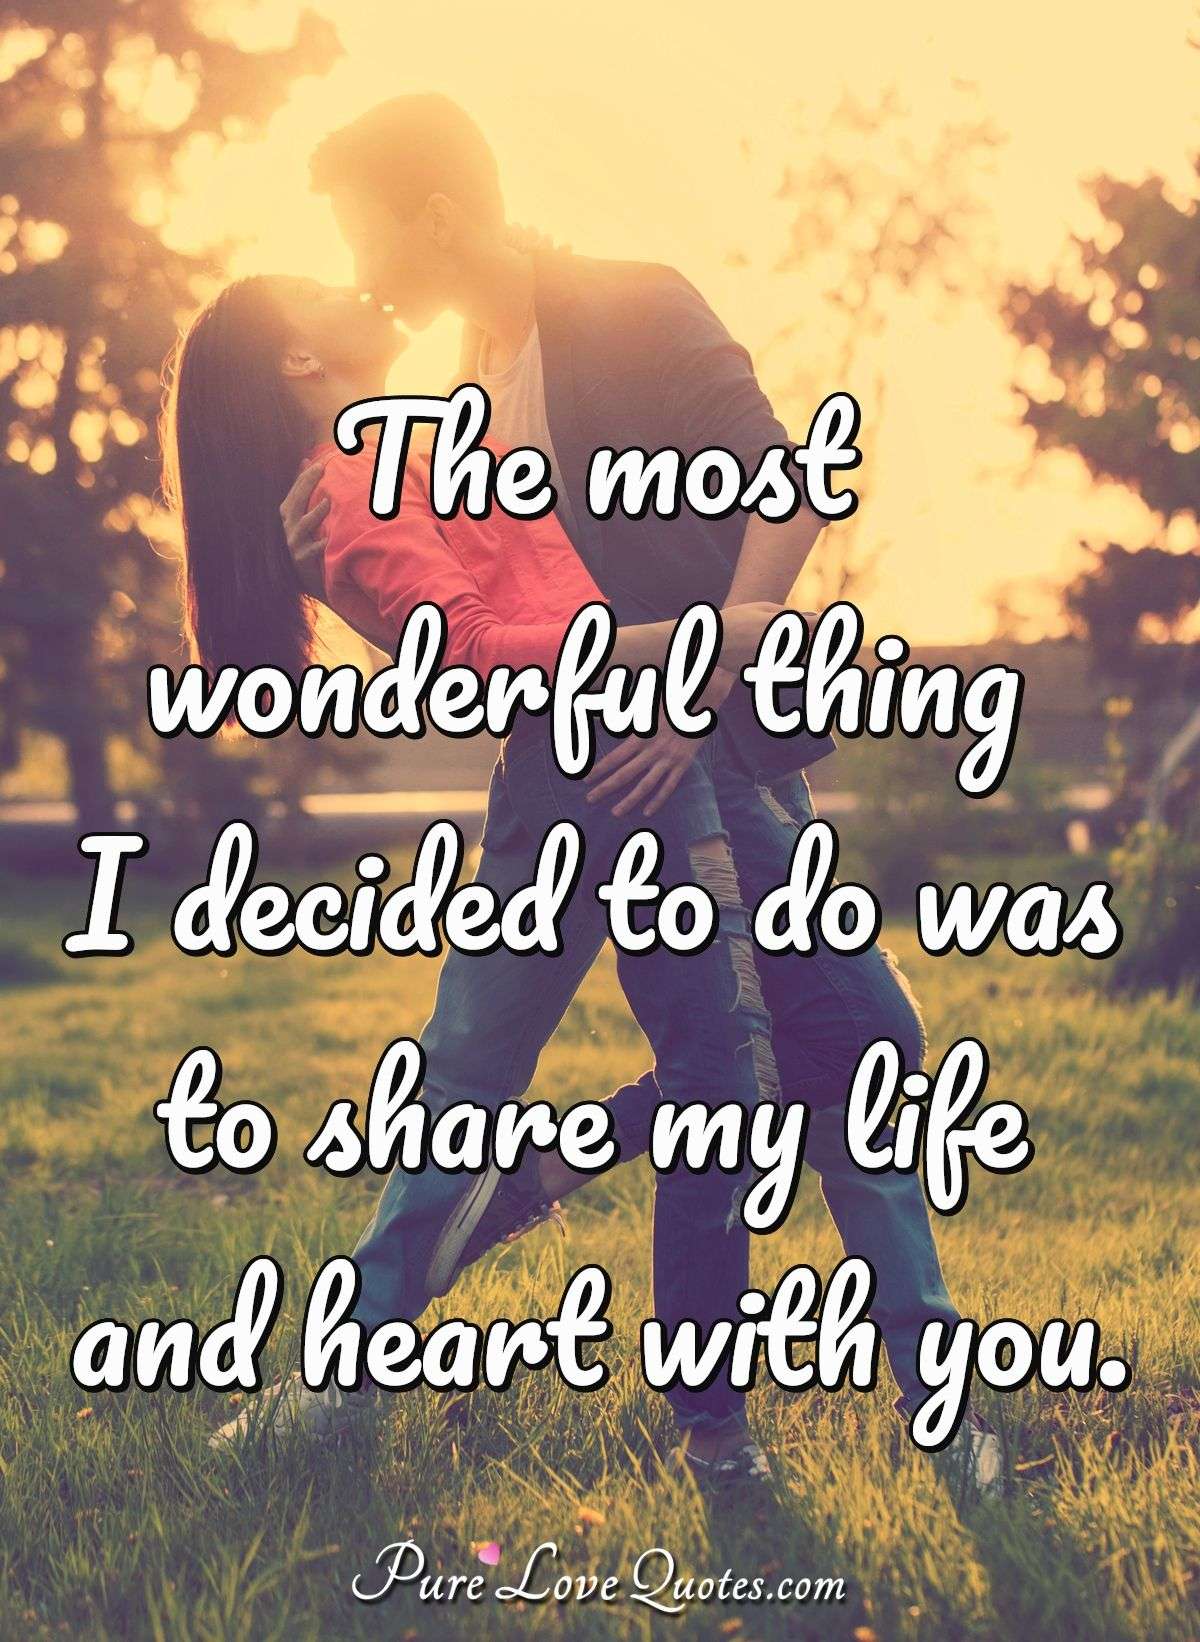 The most wonderful thing I decided to do was to share my life and heart with you. - Anonymous